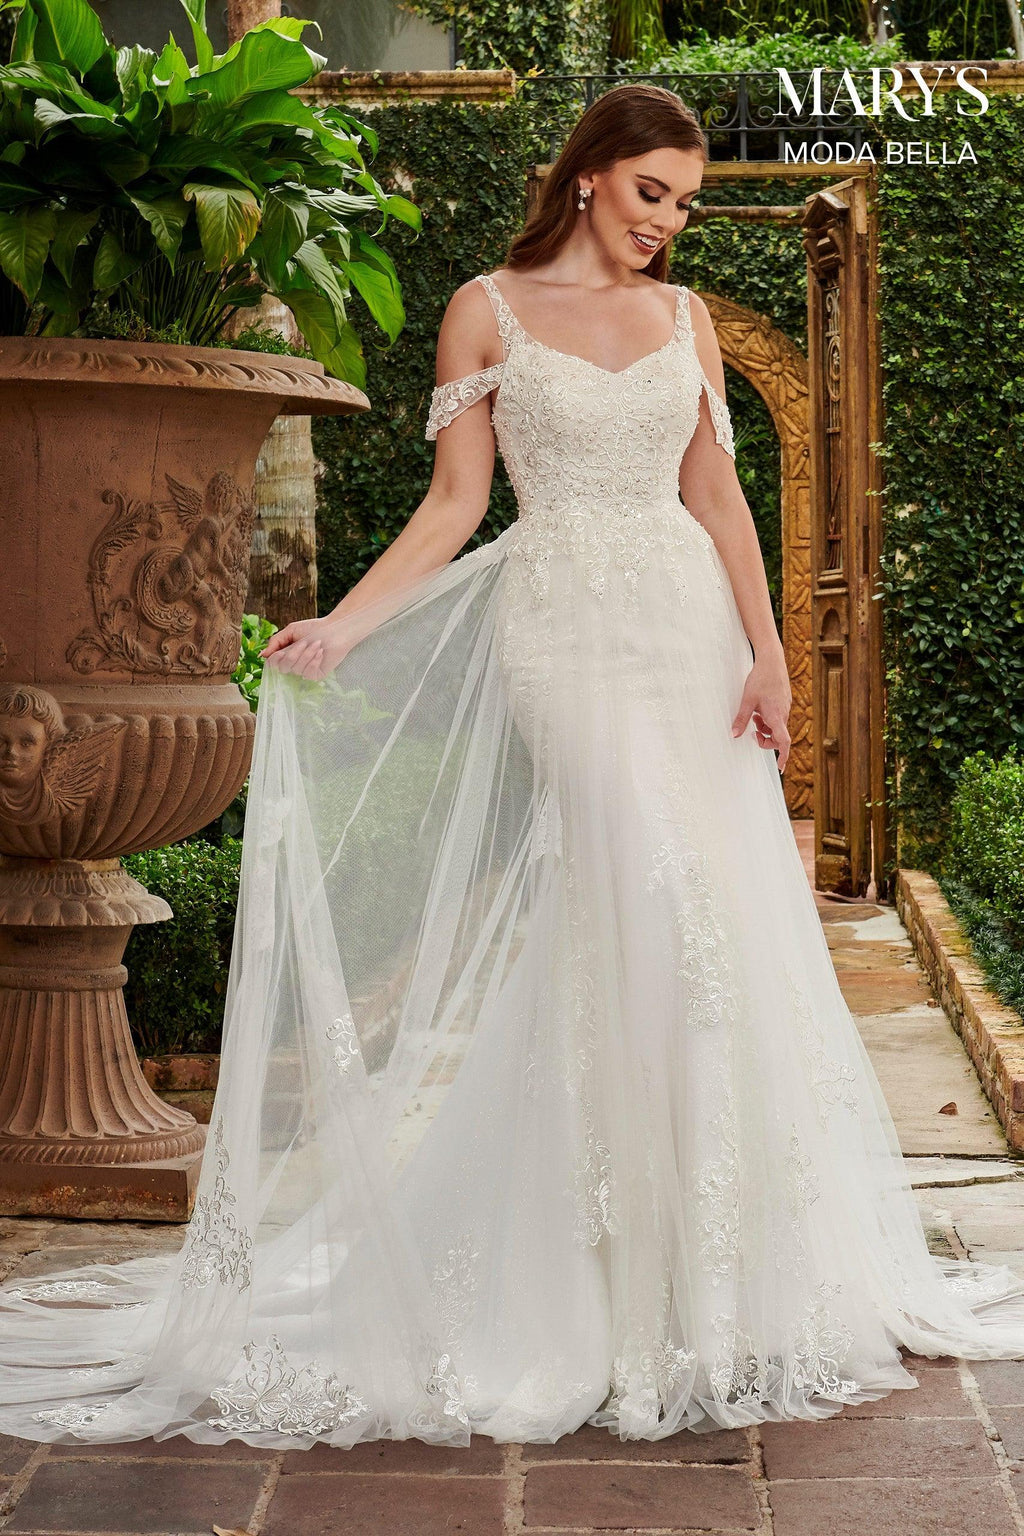 MARY'S BRIDAL - Marcia - Adore Bridal and Occasion Wear